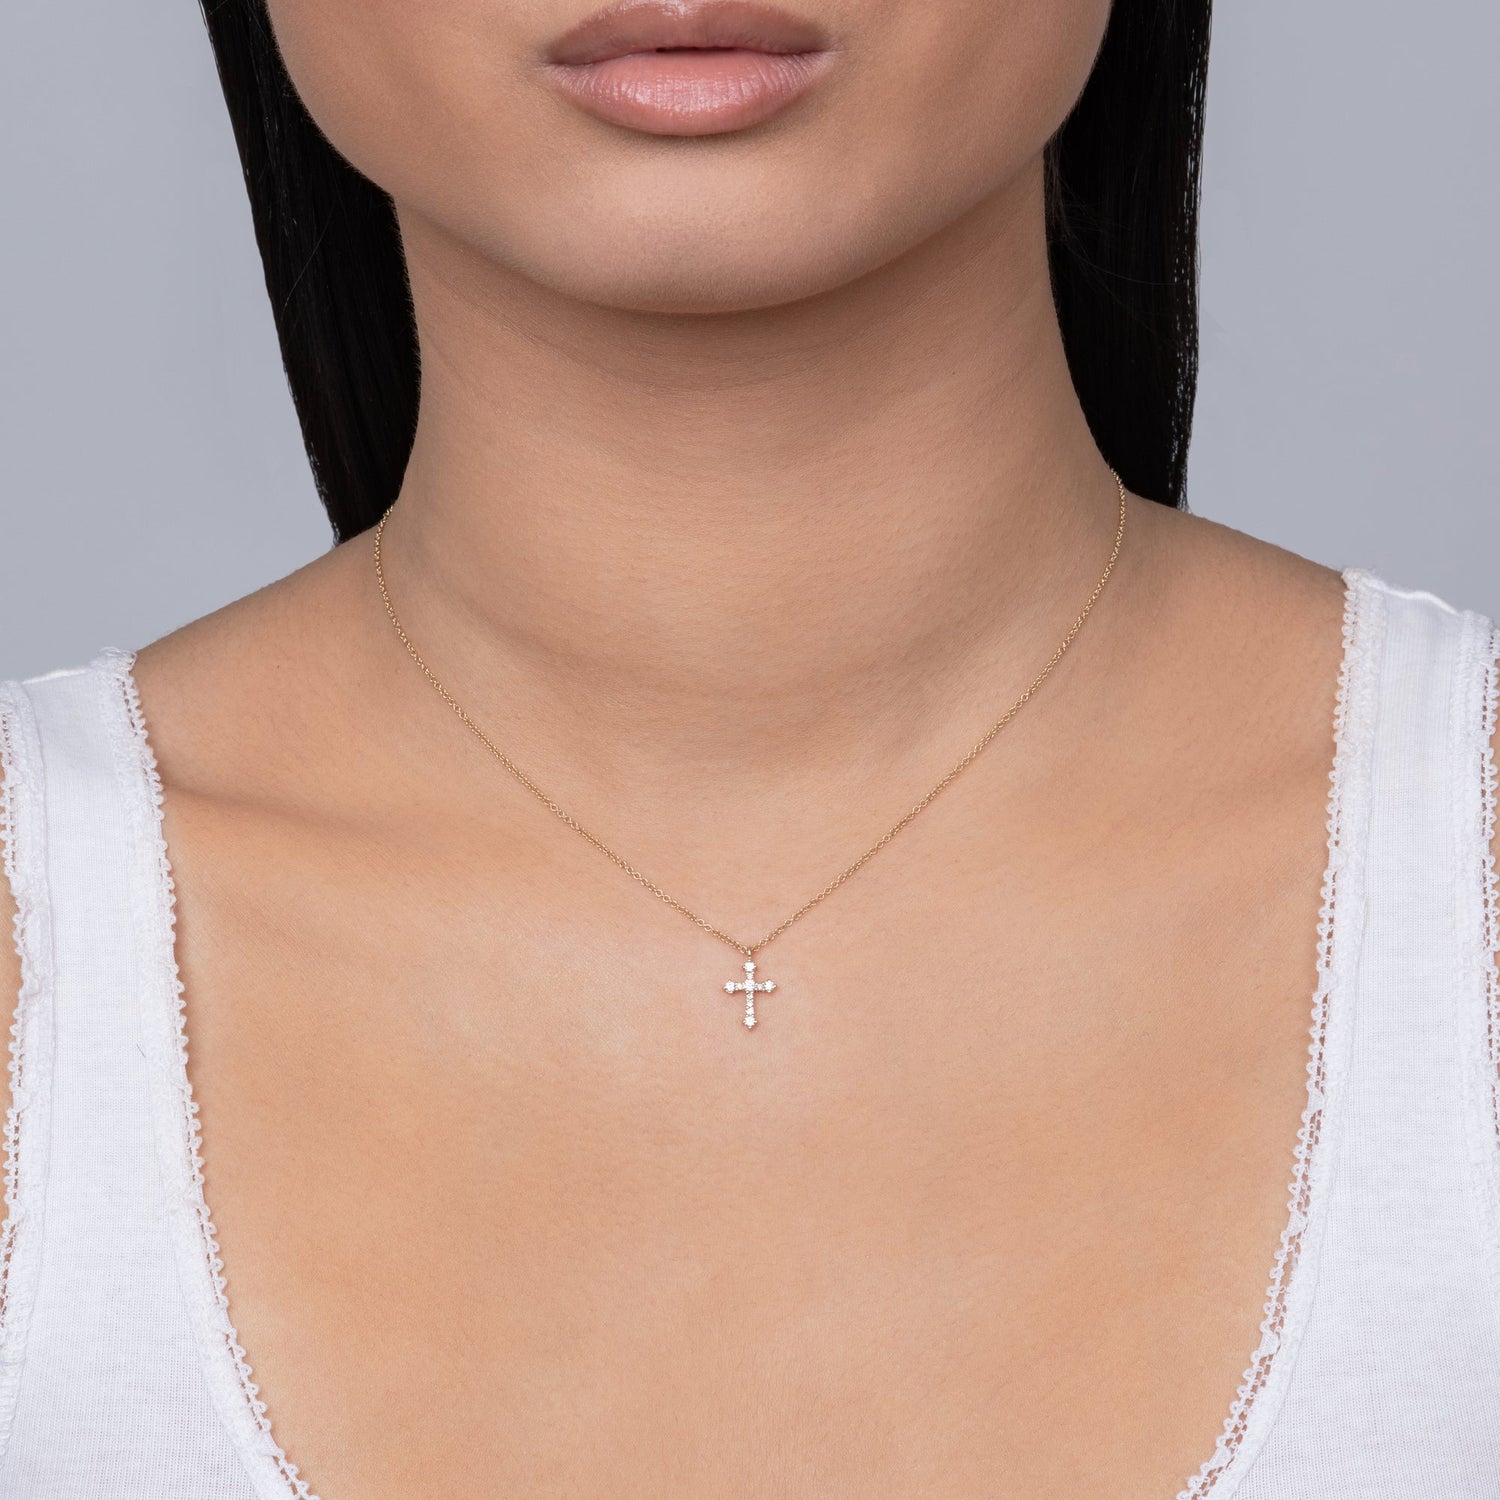 sope:) -  Cross necklace, Necklace, Fashion